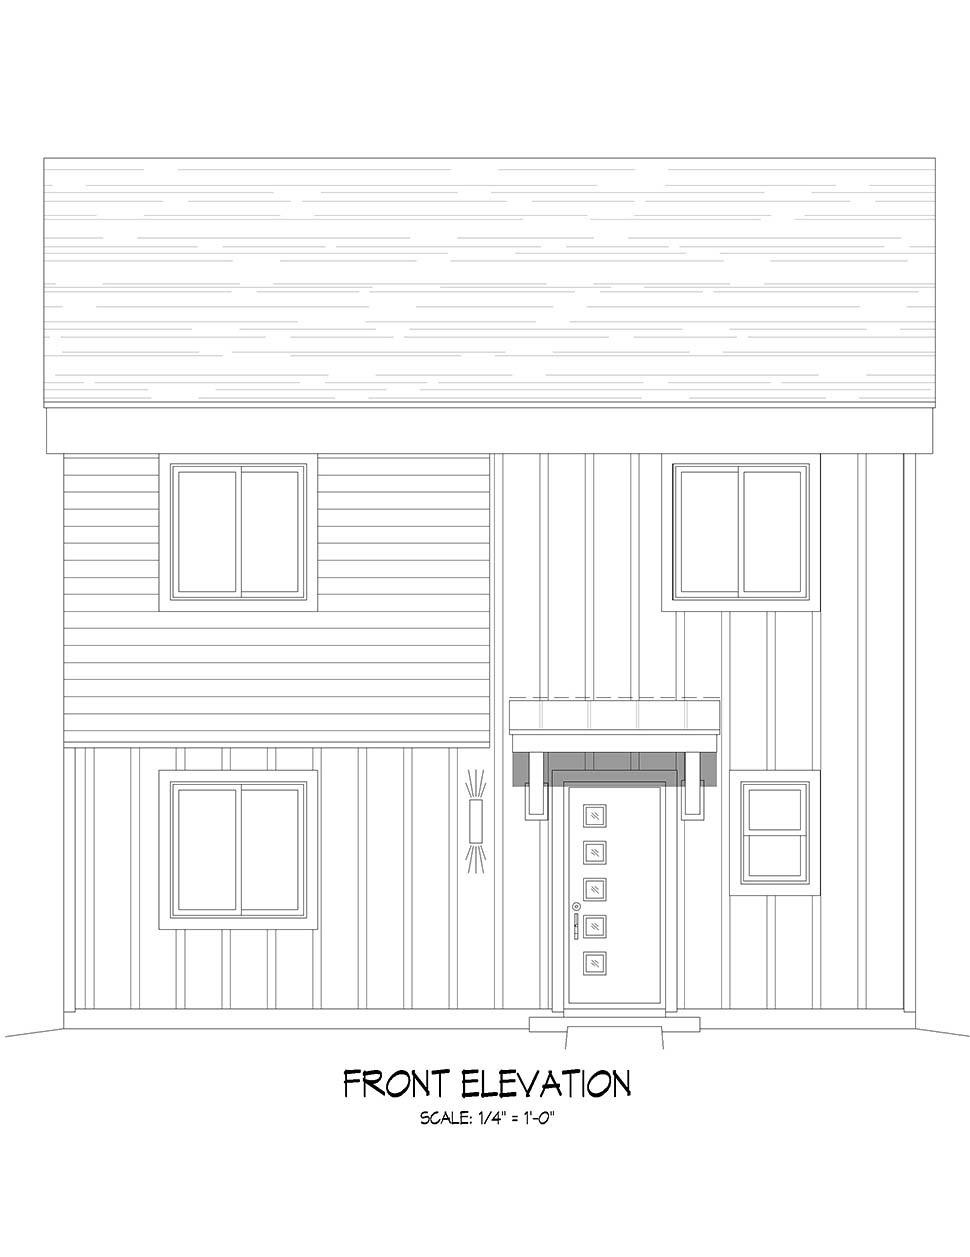 Contemporary, Modern Plan with 1500 Sq. Ft., 3 Bedrooms, 2 Bathrooms Picture 4